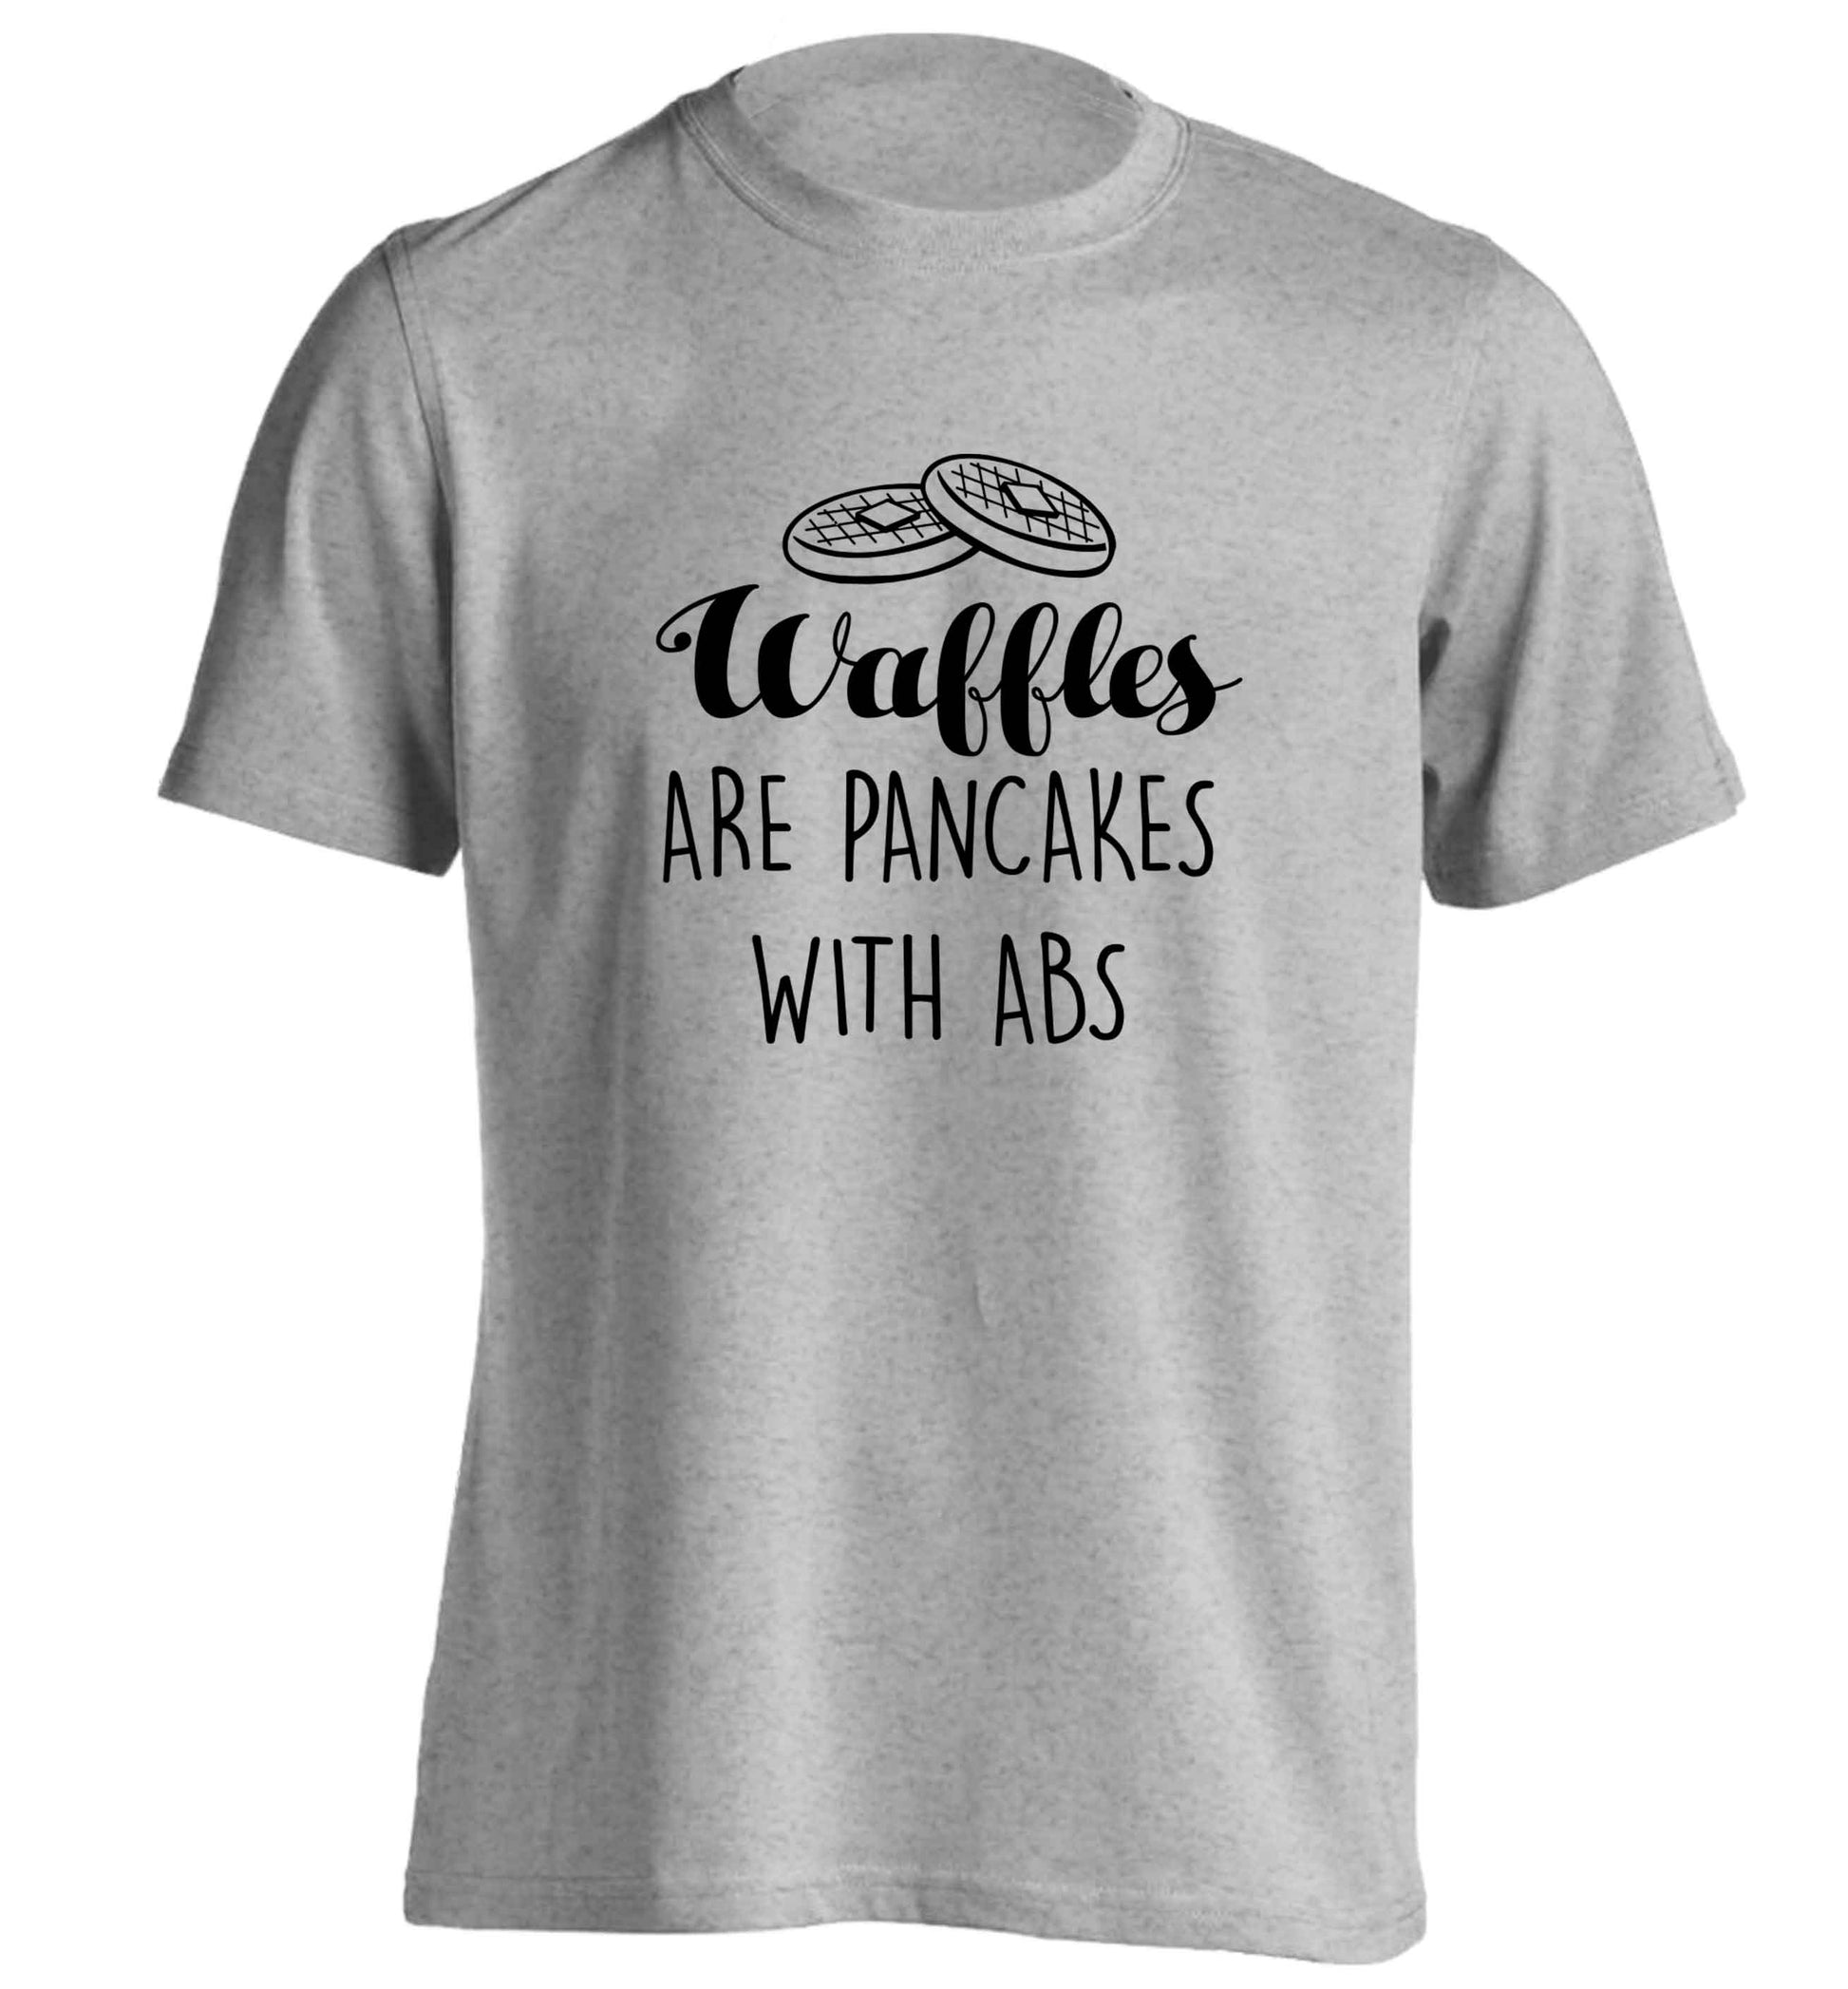 Waffles are just pancakes with abs adults unisex grey Tshirt 2XL